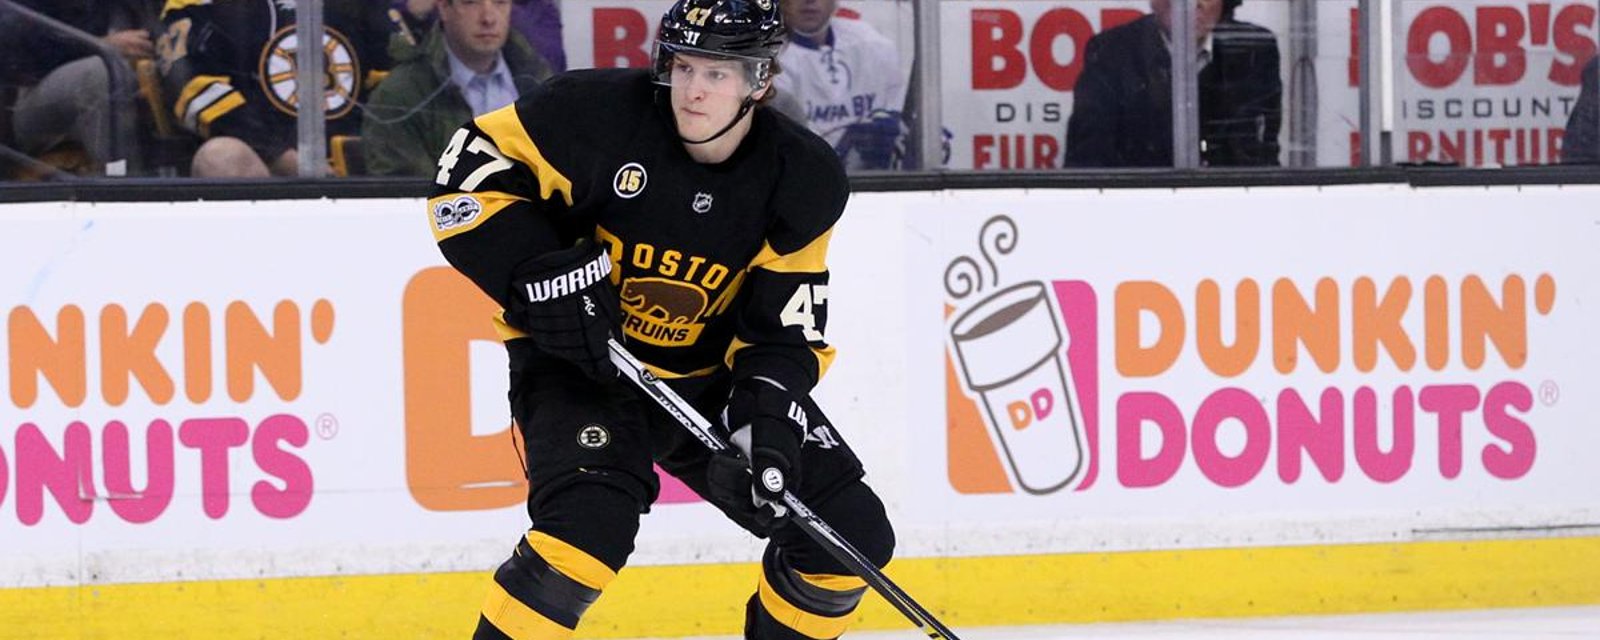 BREAKING : Torey Krug's hurt, out for the night (at least). 